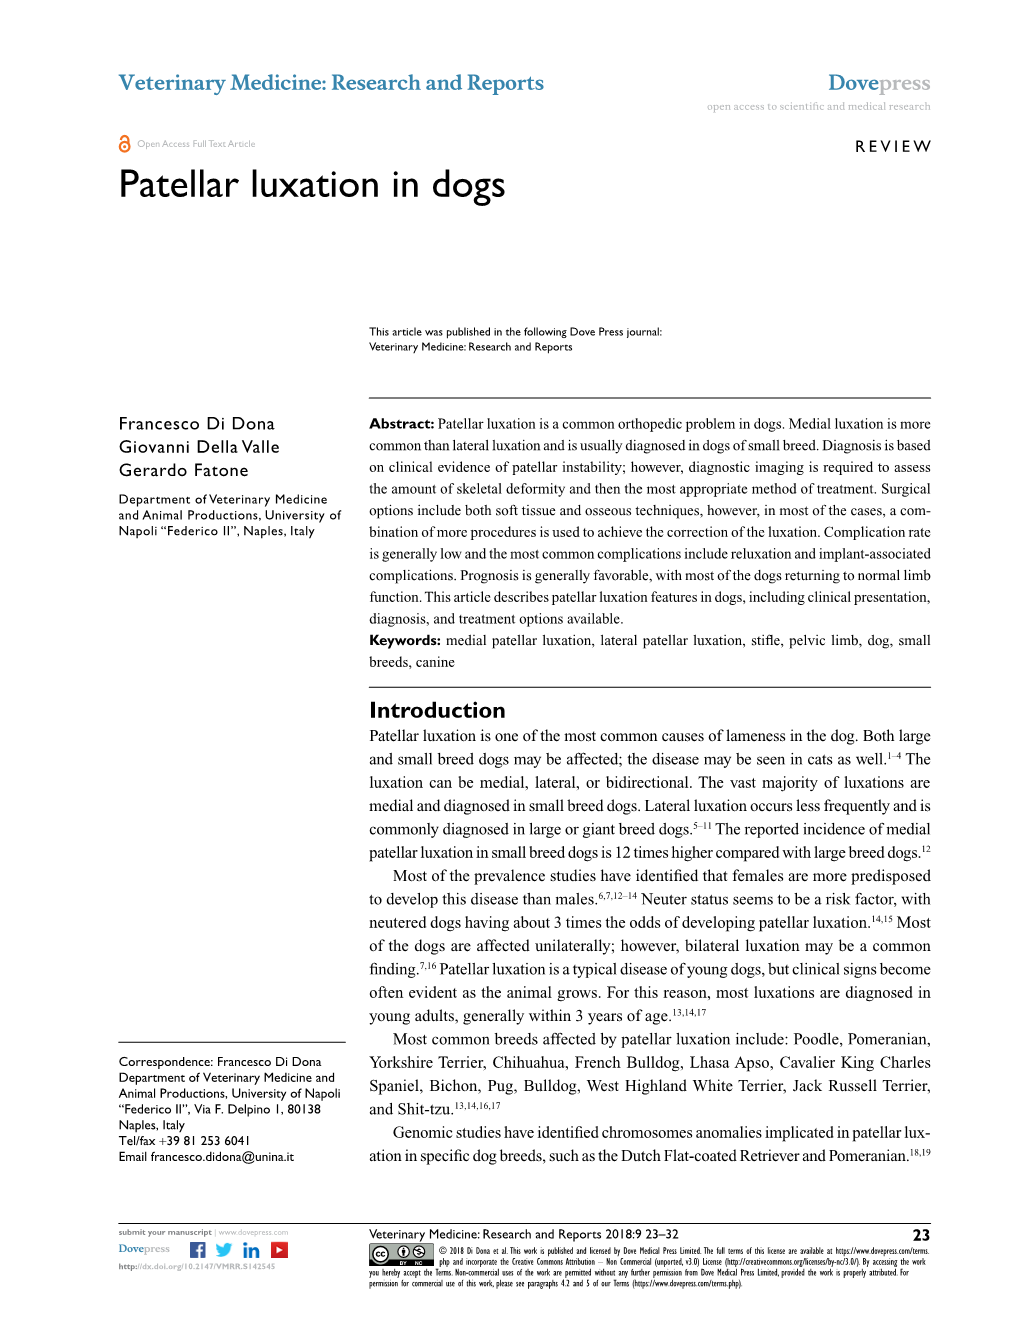 Patellar Luxation in Dogs Open Access to Scientific and Medical Research DOI